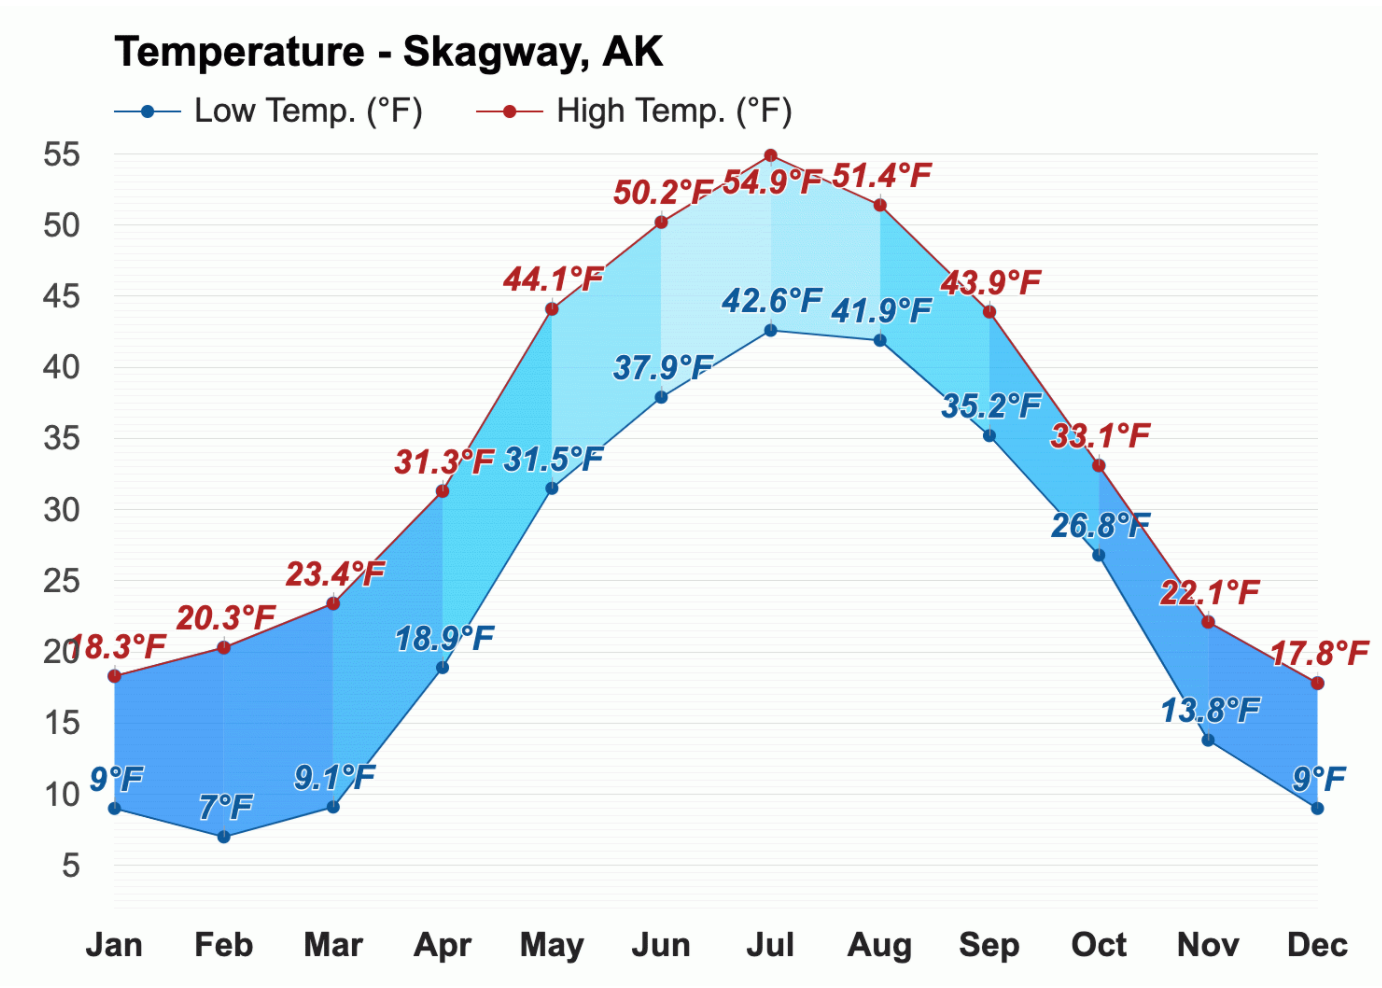 Skagway weather averages by month - courtesy of weather-us.com